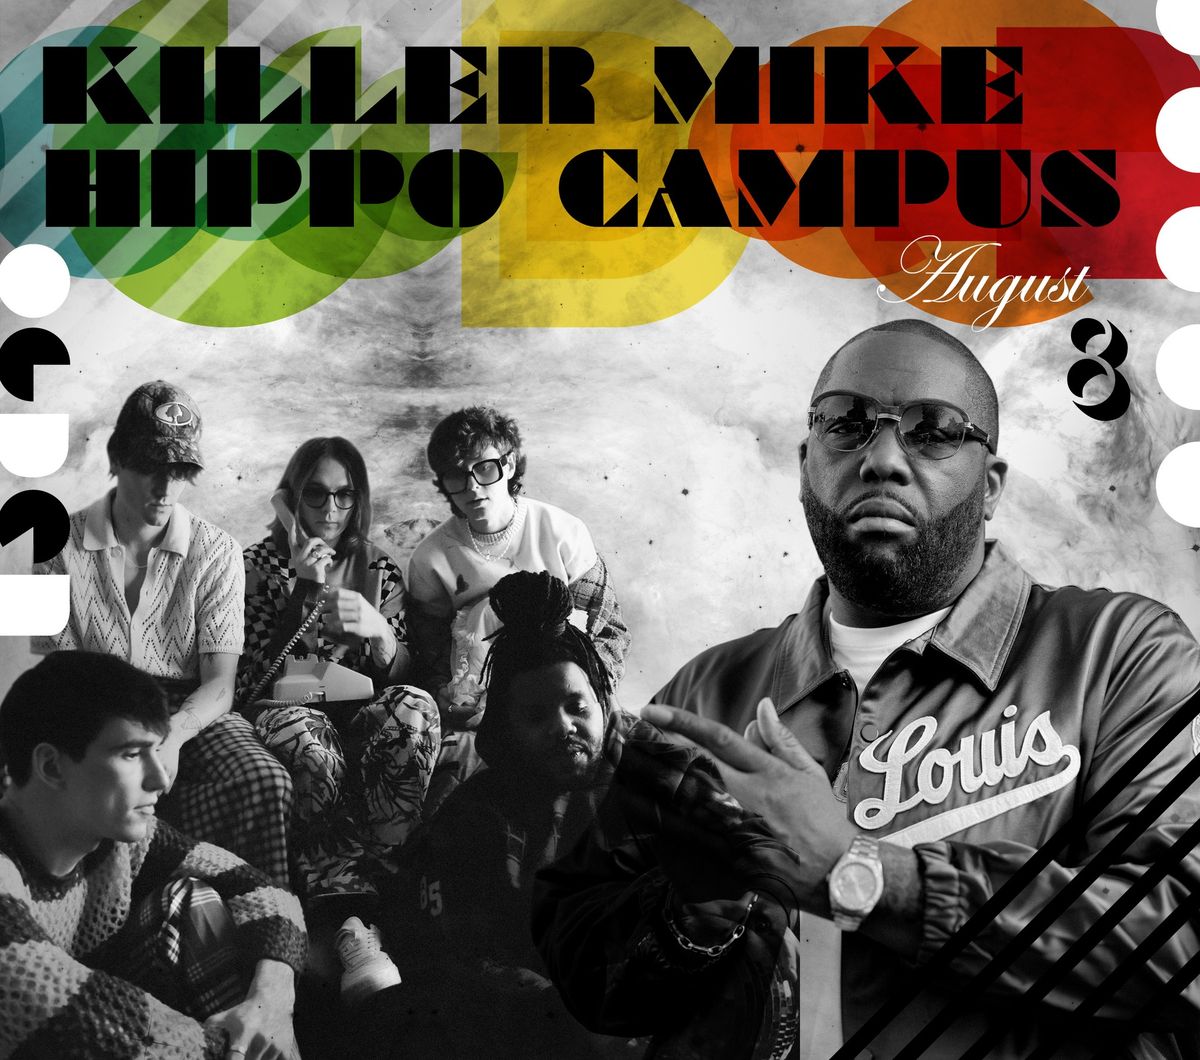 Killer Mike and Hippo Campus with Bad Luck Brigade